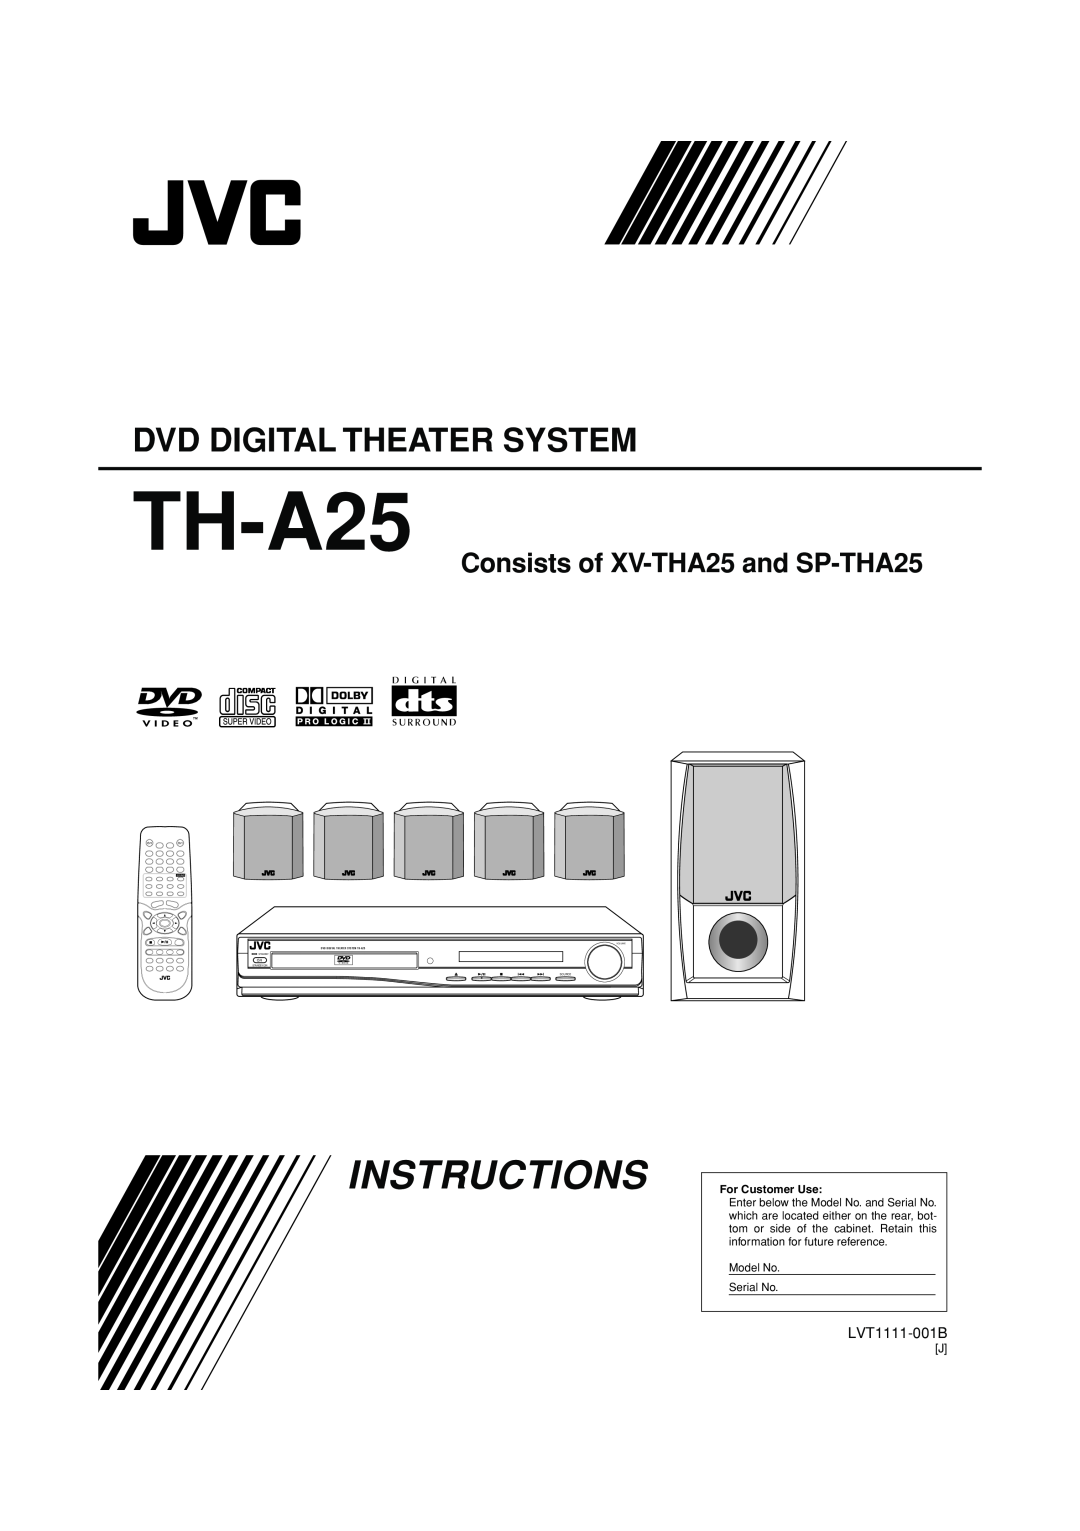 JVC TH-A25 manual Consists of XV-THA25and SP-THA25, Dvd Digital Cinema System, Instructions, LVT1111-003A, Source, Sound 